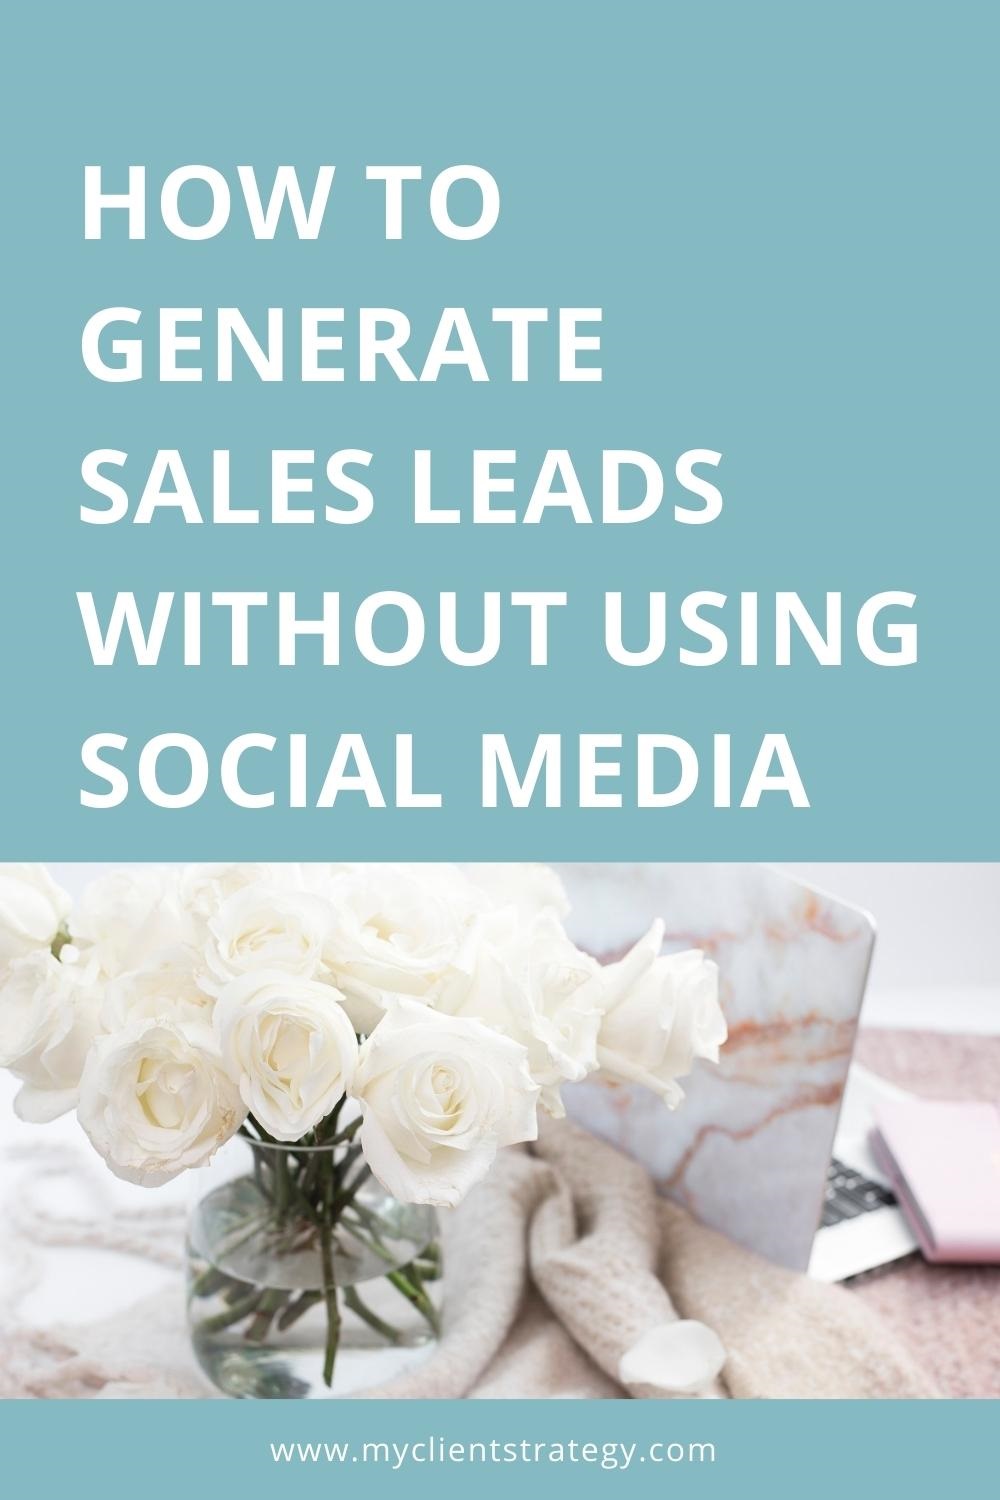 How to generate sales leads without social media